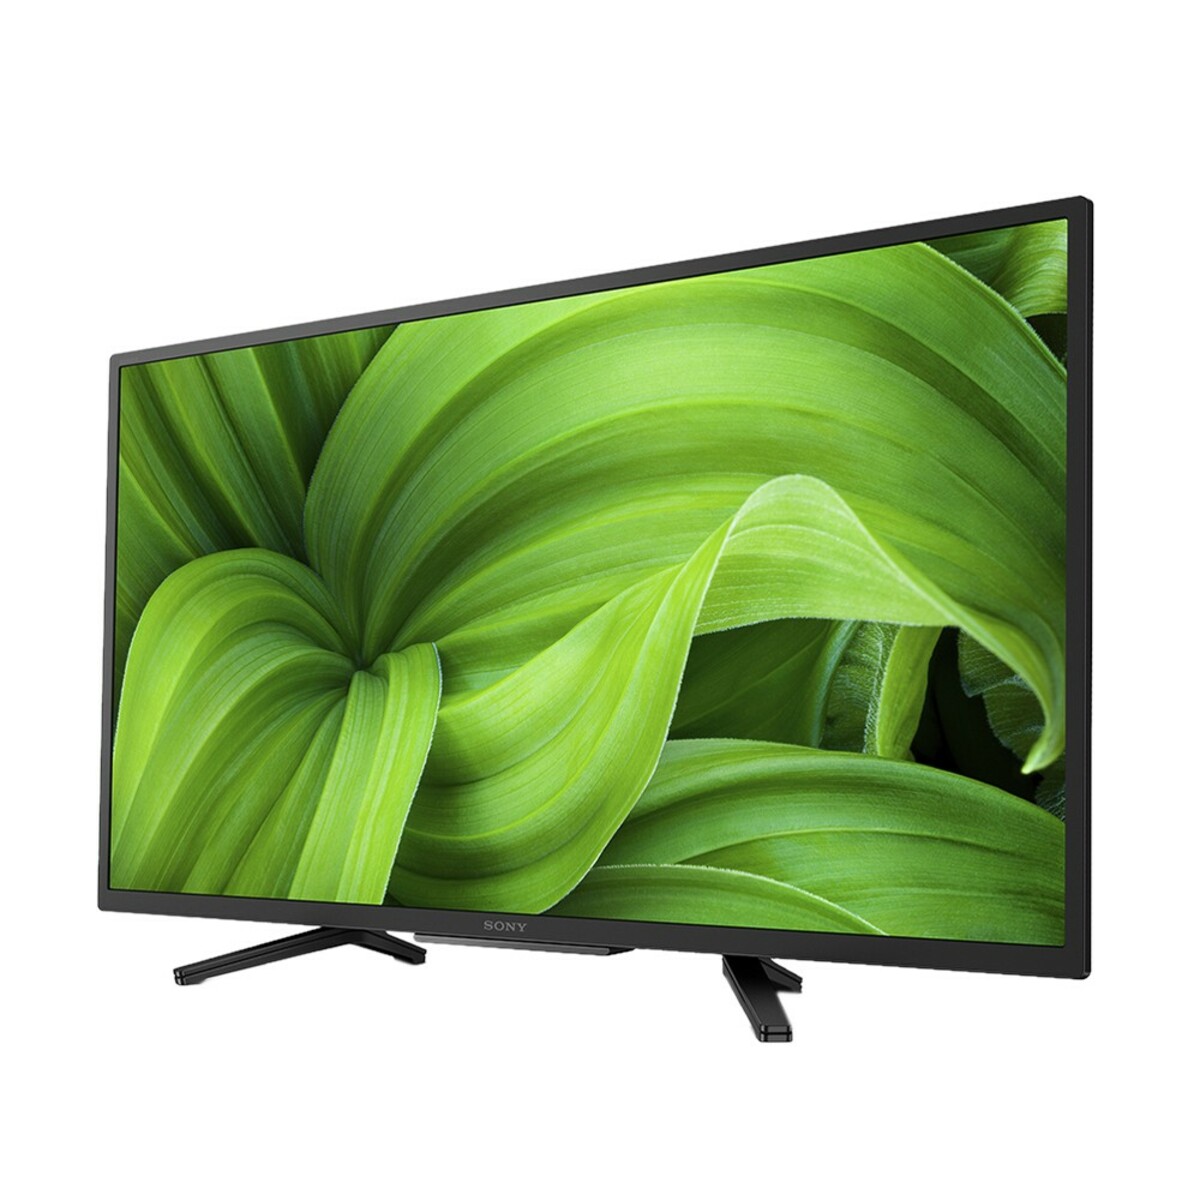 Sony HD Ready Smart Android LED TV KD-32W830 32"